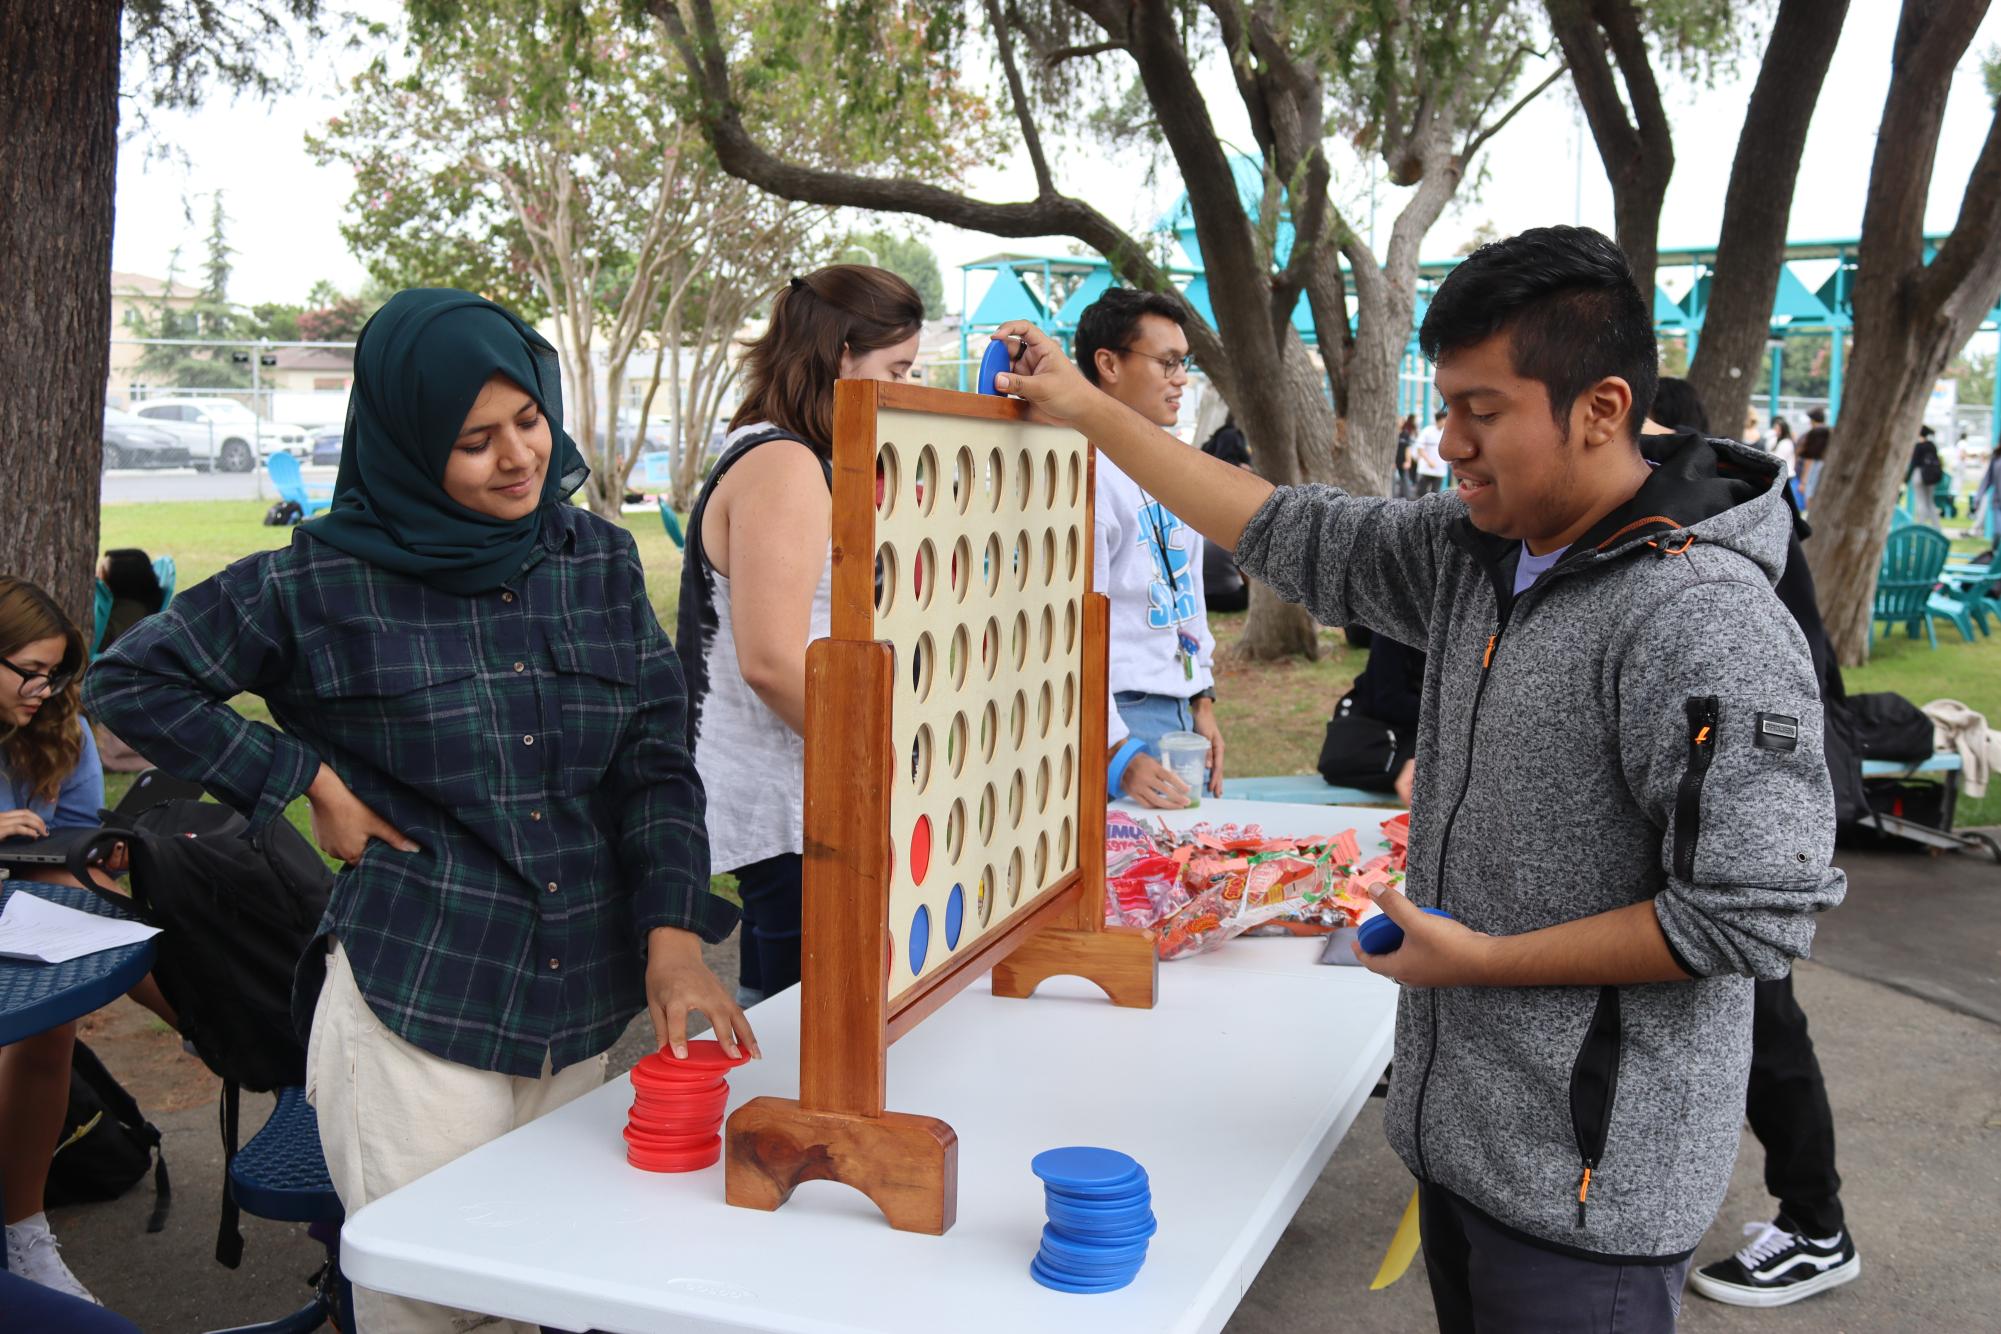 Senior Behishta Safi plays Connect 4 with senior Anthony Jimenez during Fiesta Friday in the grove on Sept. 29.